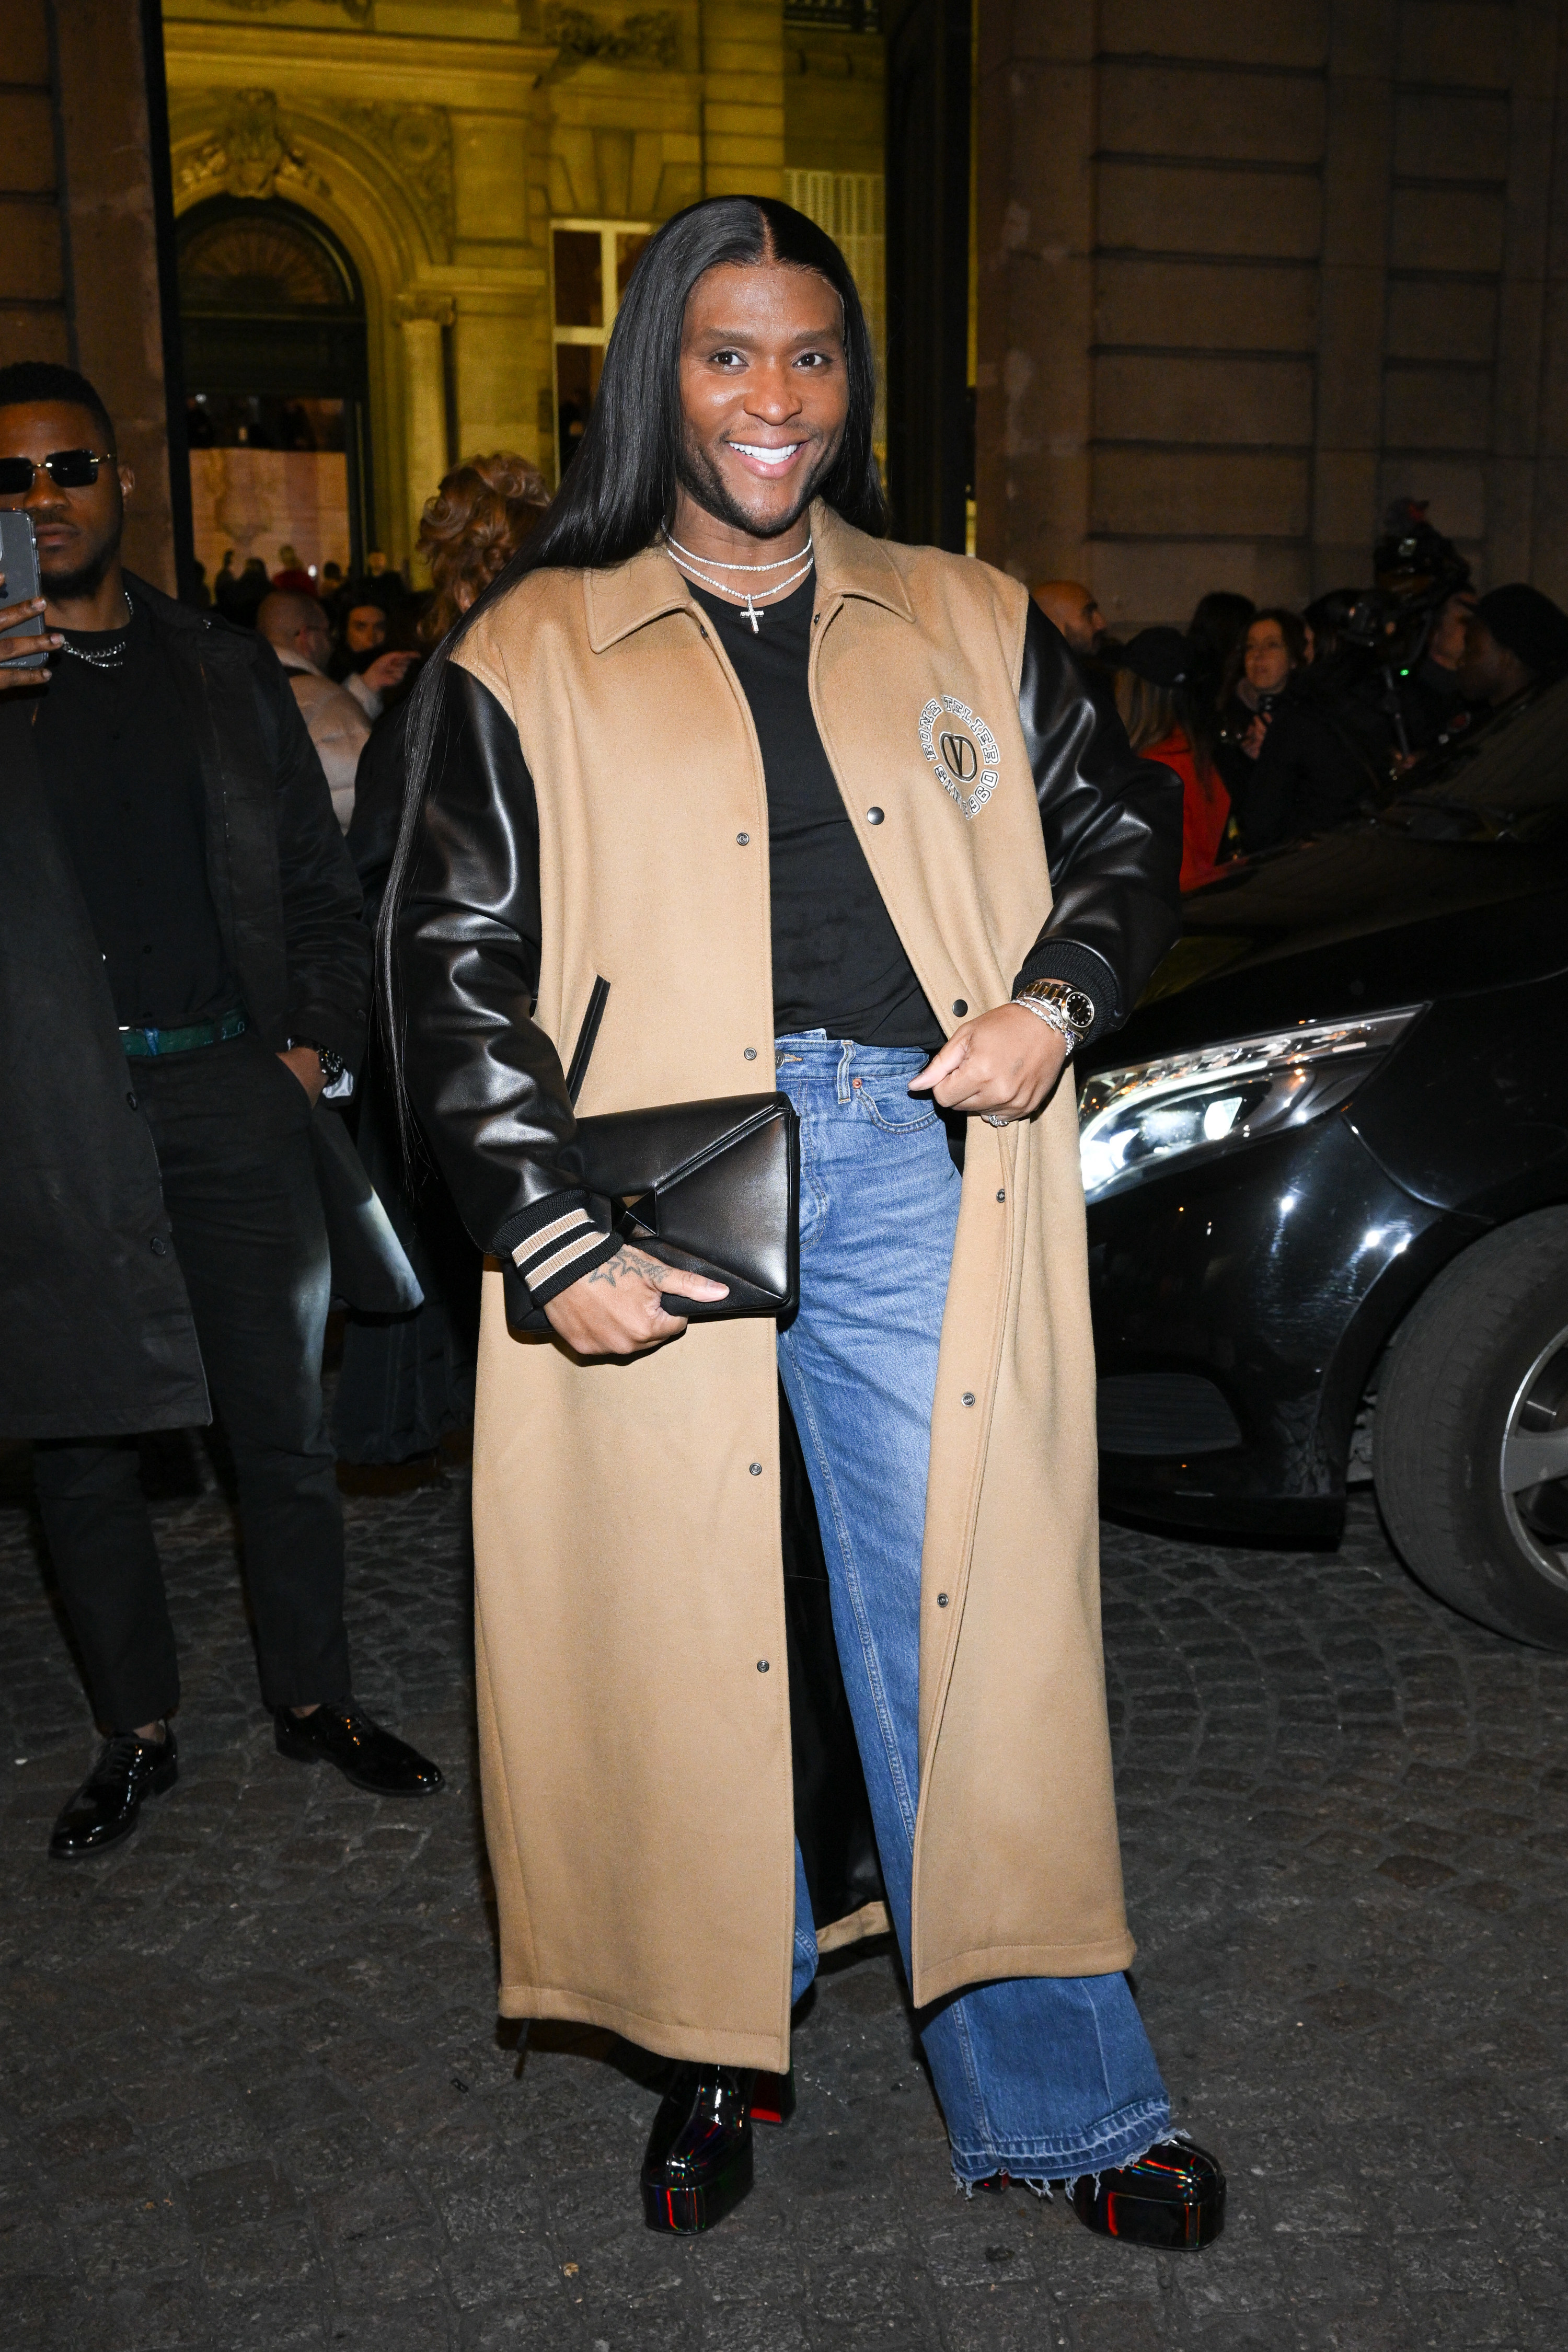 Law smiles as he stands outside at an evening event. He&#x27;s wearing a long coat and jeans